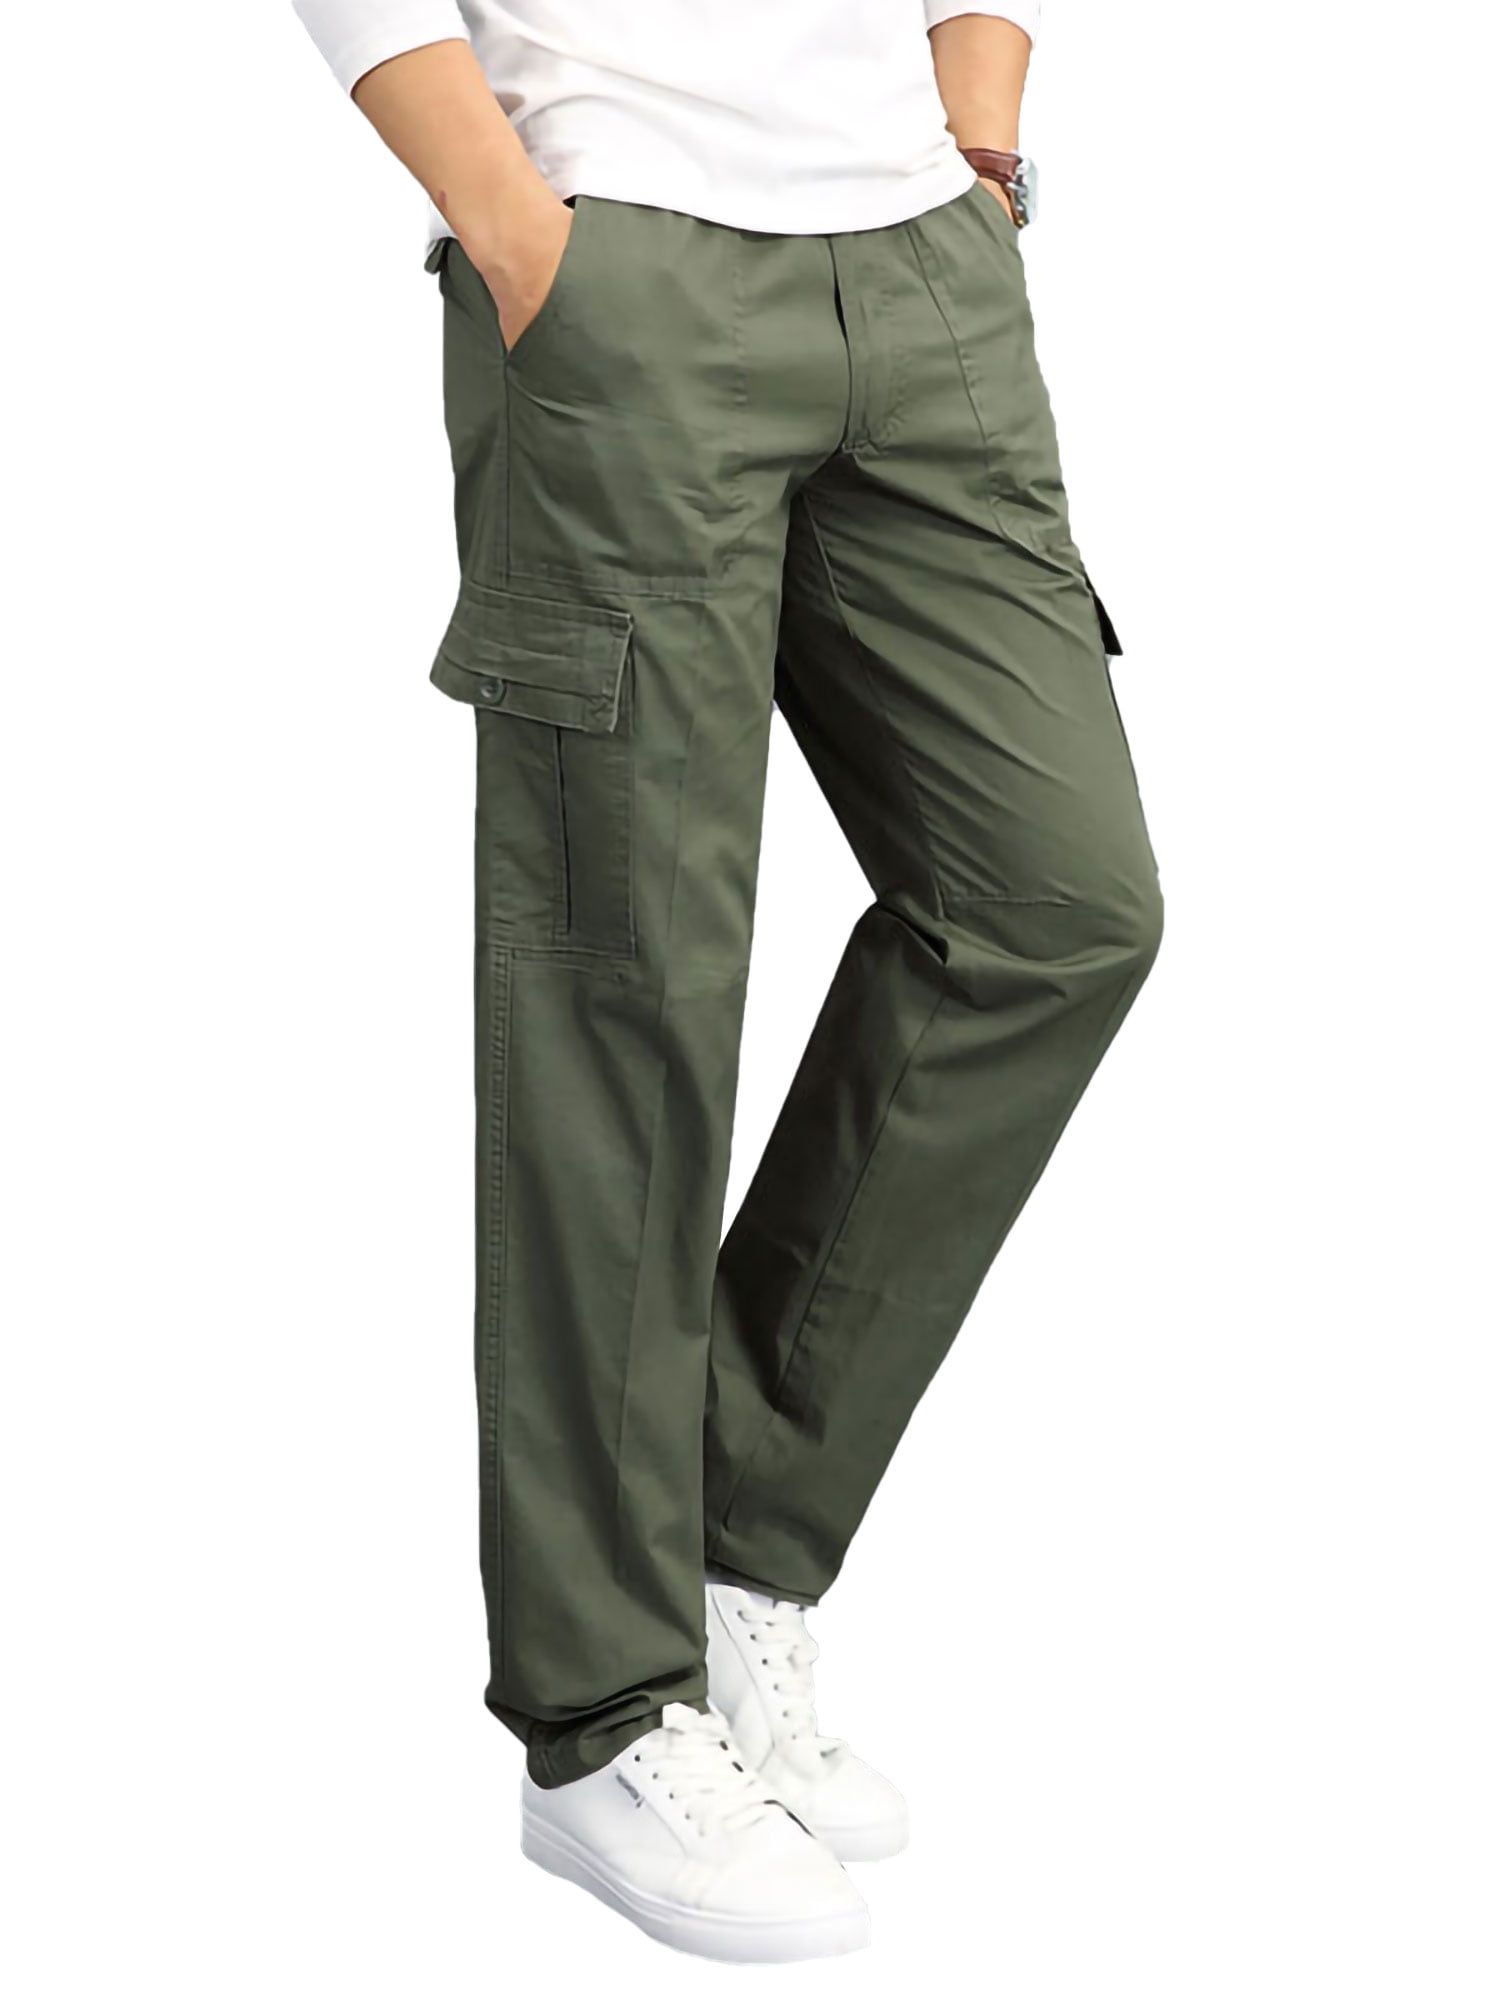 OTW Mens Multi-Pockets Cotton Washed Casual Utility Loose Fit Cargo Jogger Pants